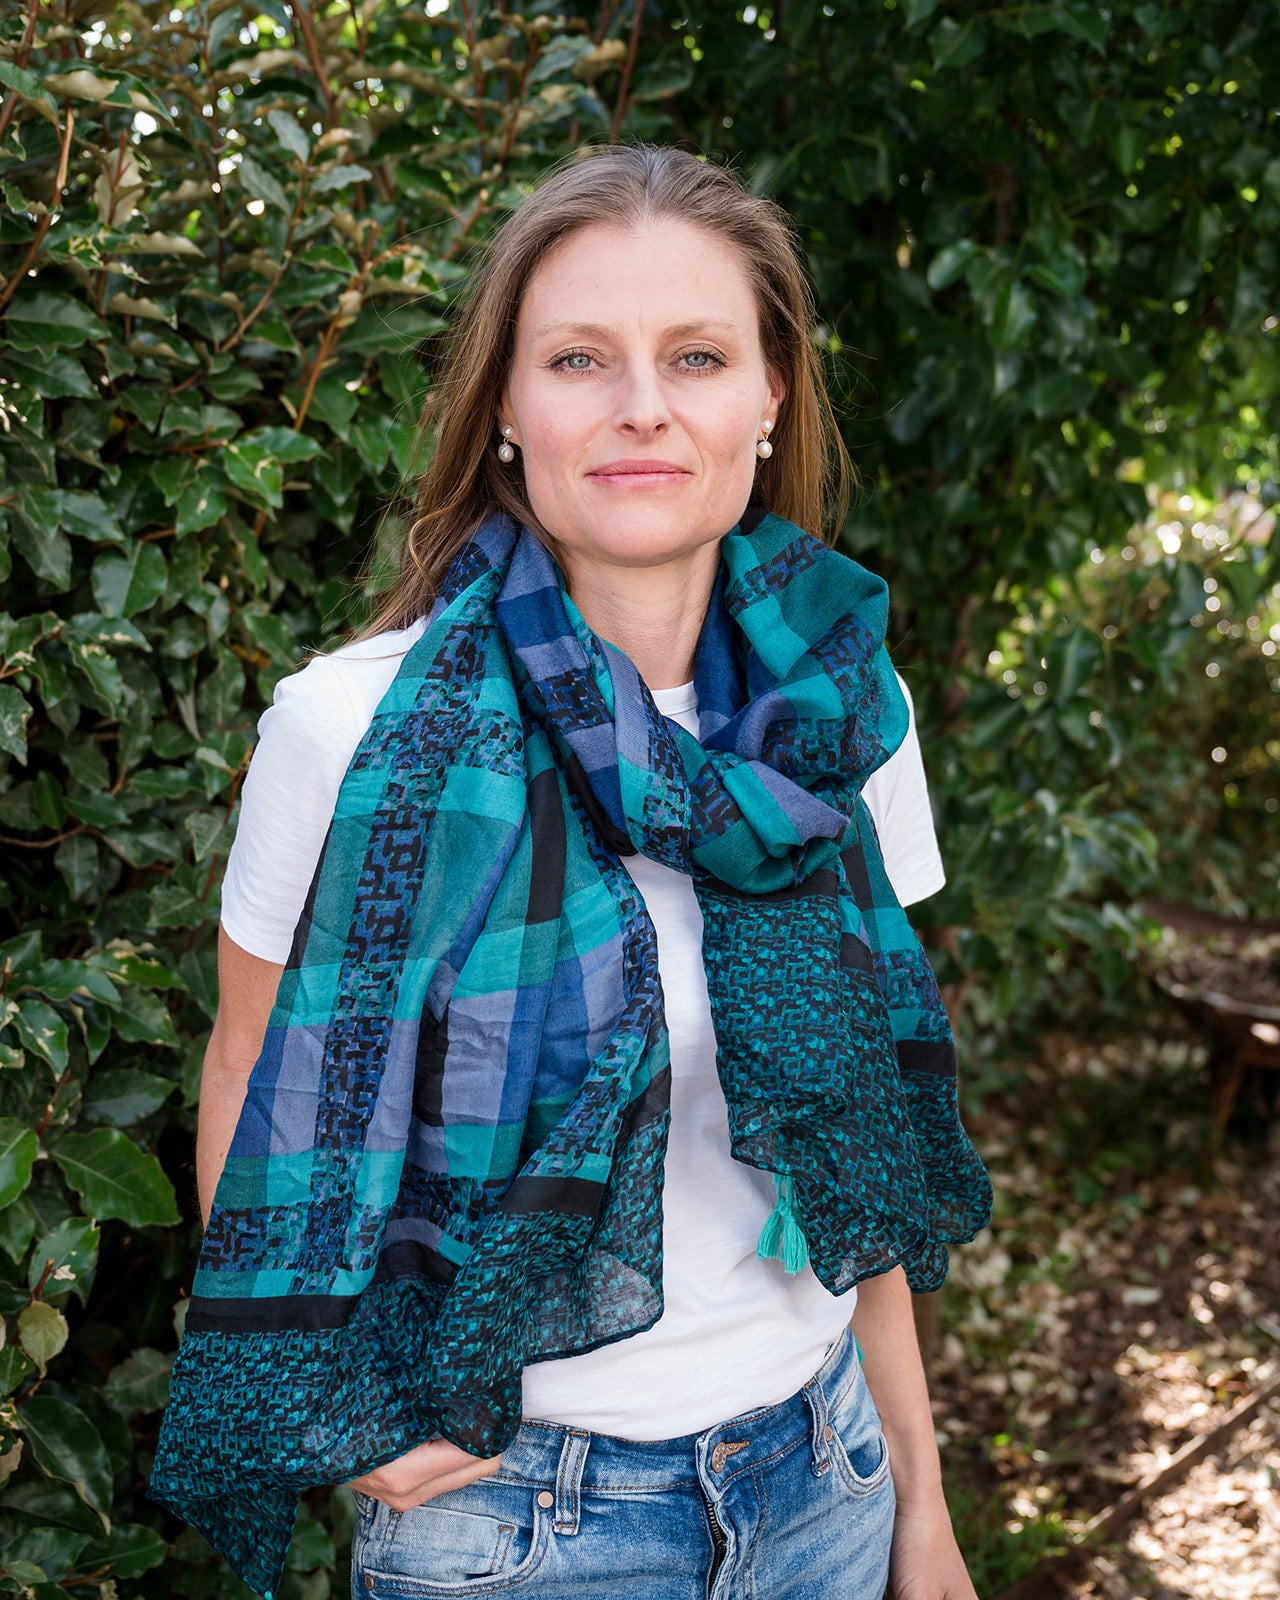 Elevate your look with our stylish tartan print scarf, showcasing a mix of blues and greens, highlighted by aqua tassels on each corner. The modern geometric design adds flair to this classic pattern, perfect for adding color and style to any outfit while staying cozy and chic. Crafted from a comfortable polyester blend.